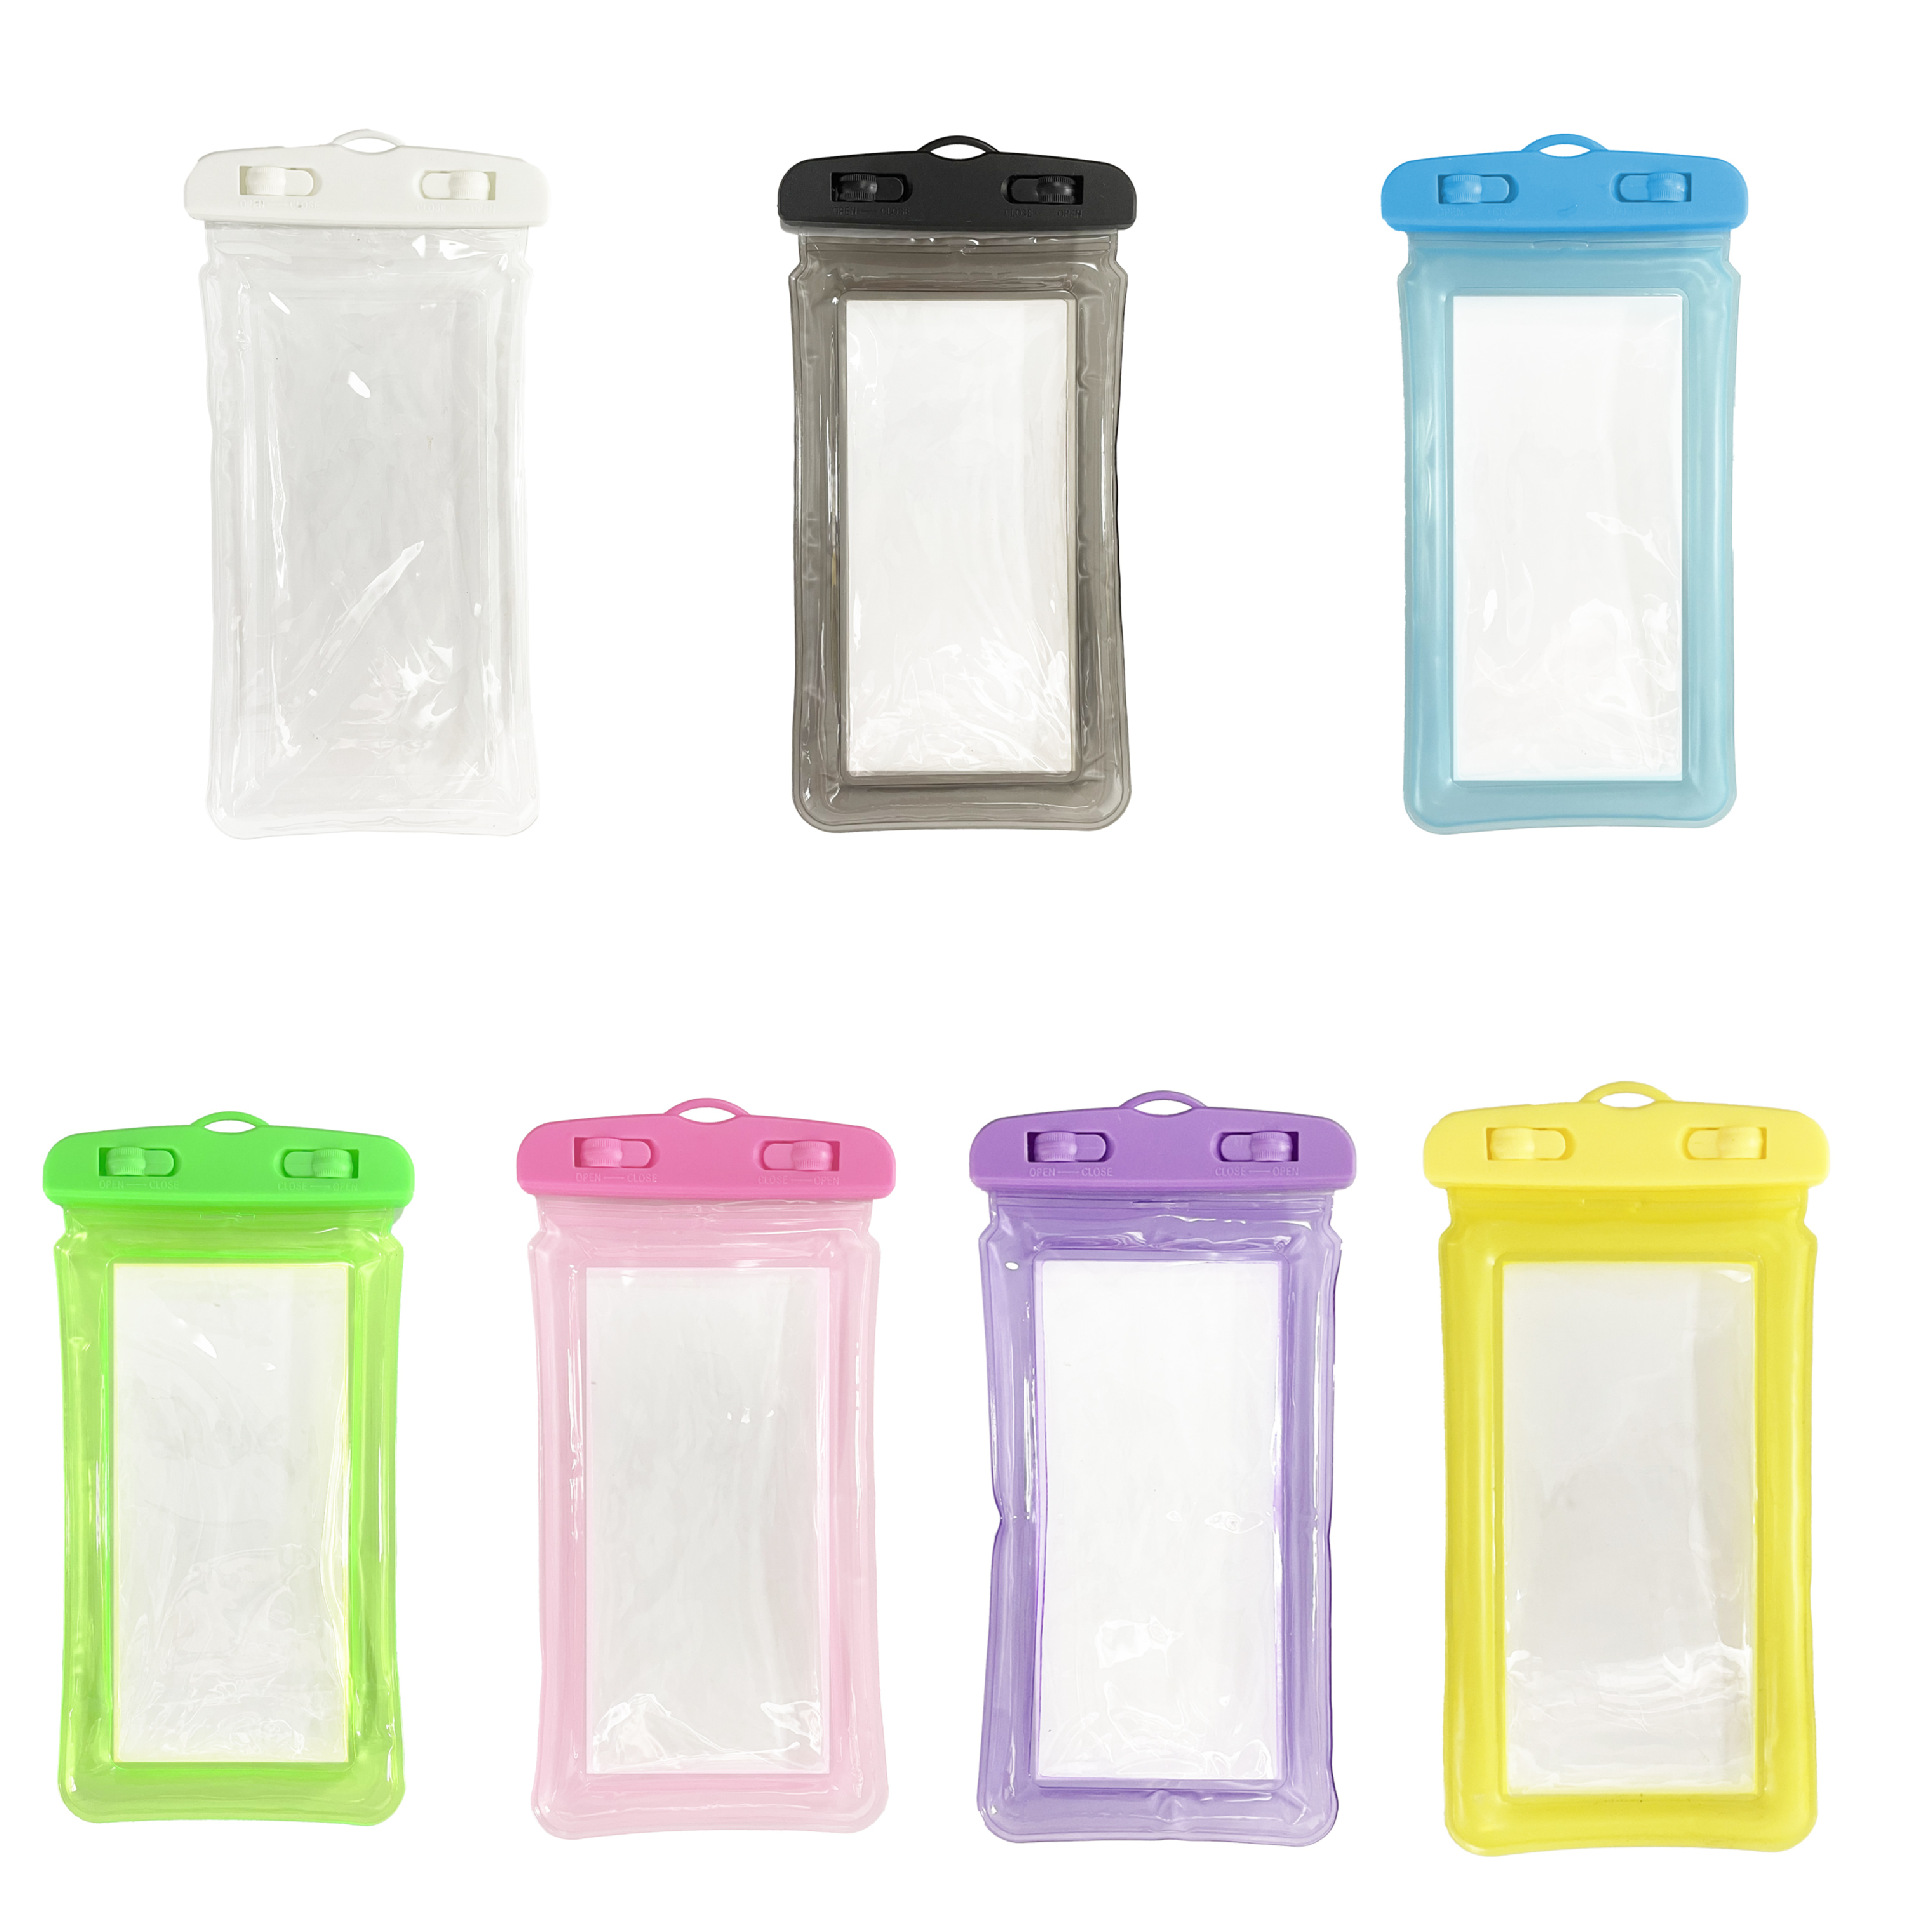 Transparent PVC Mobile Phone Waterproof Bag Can Touch Screen Water Park Play Waterproof And Dustproof Mobile Phone Protection